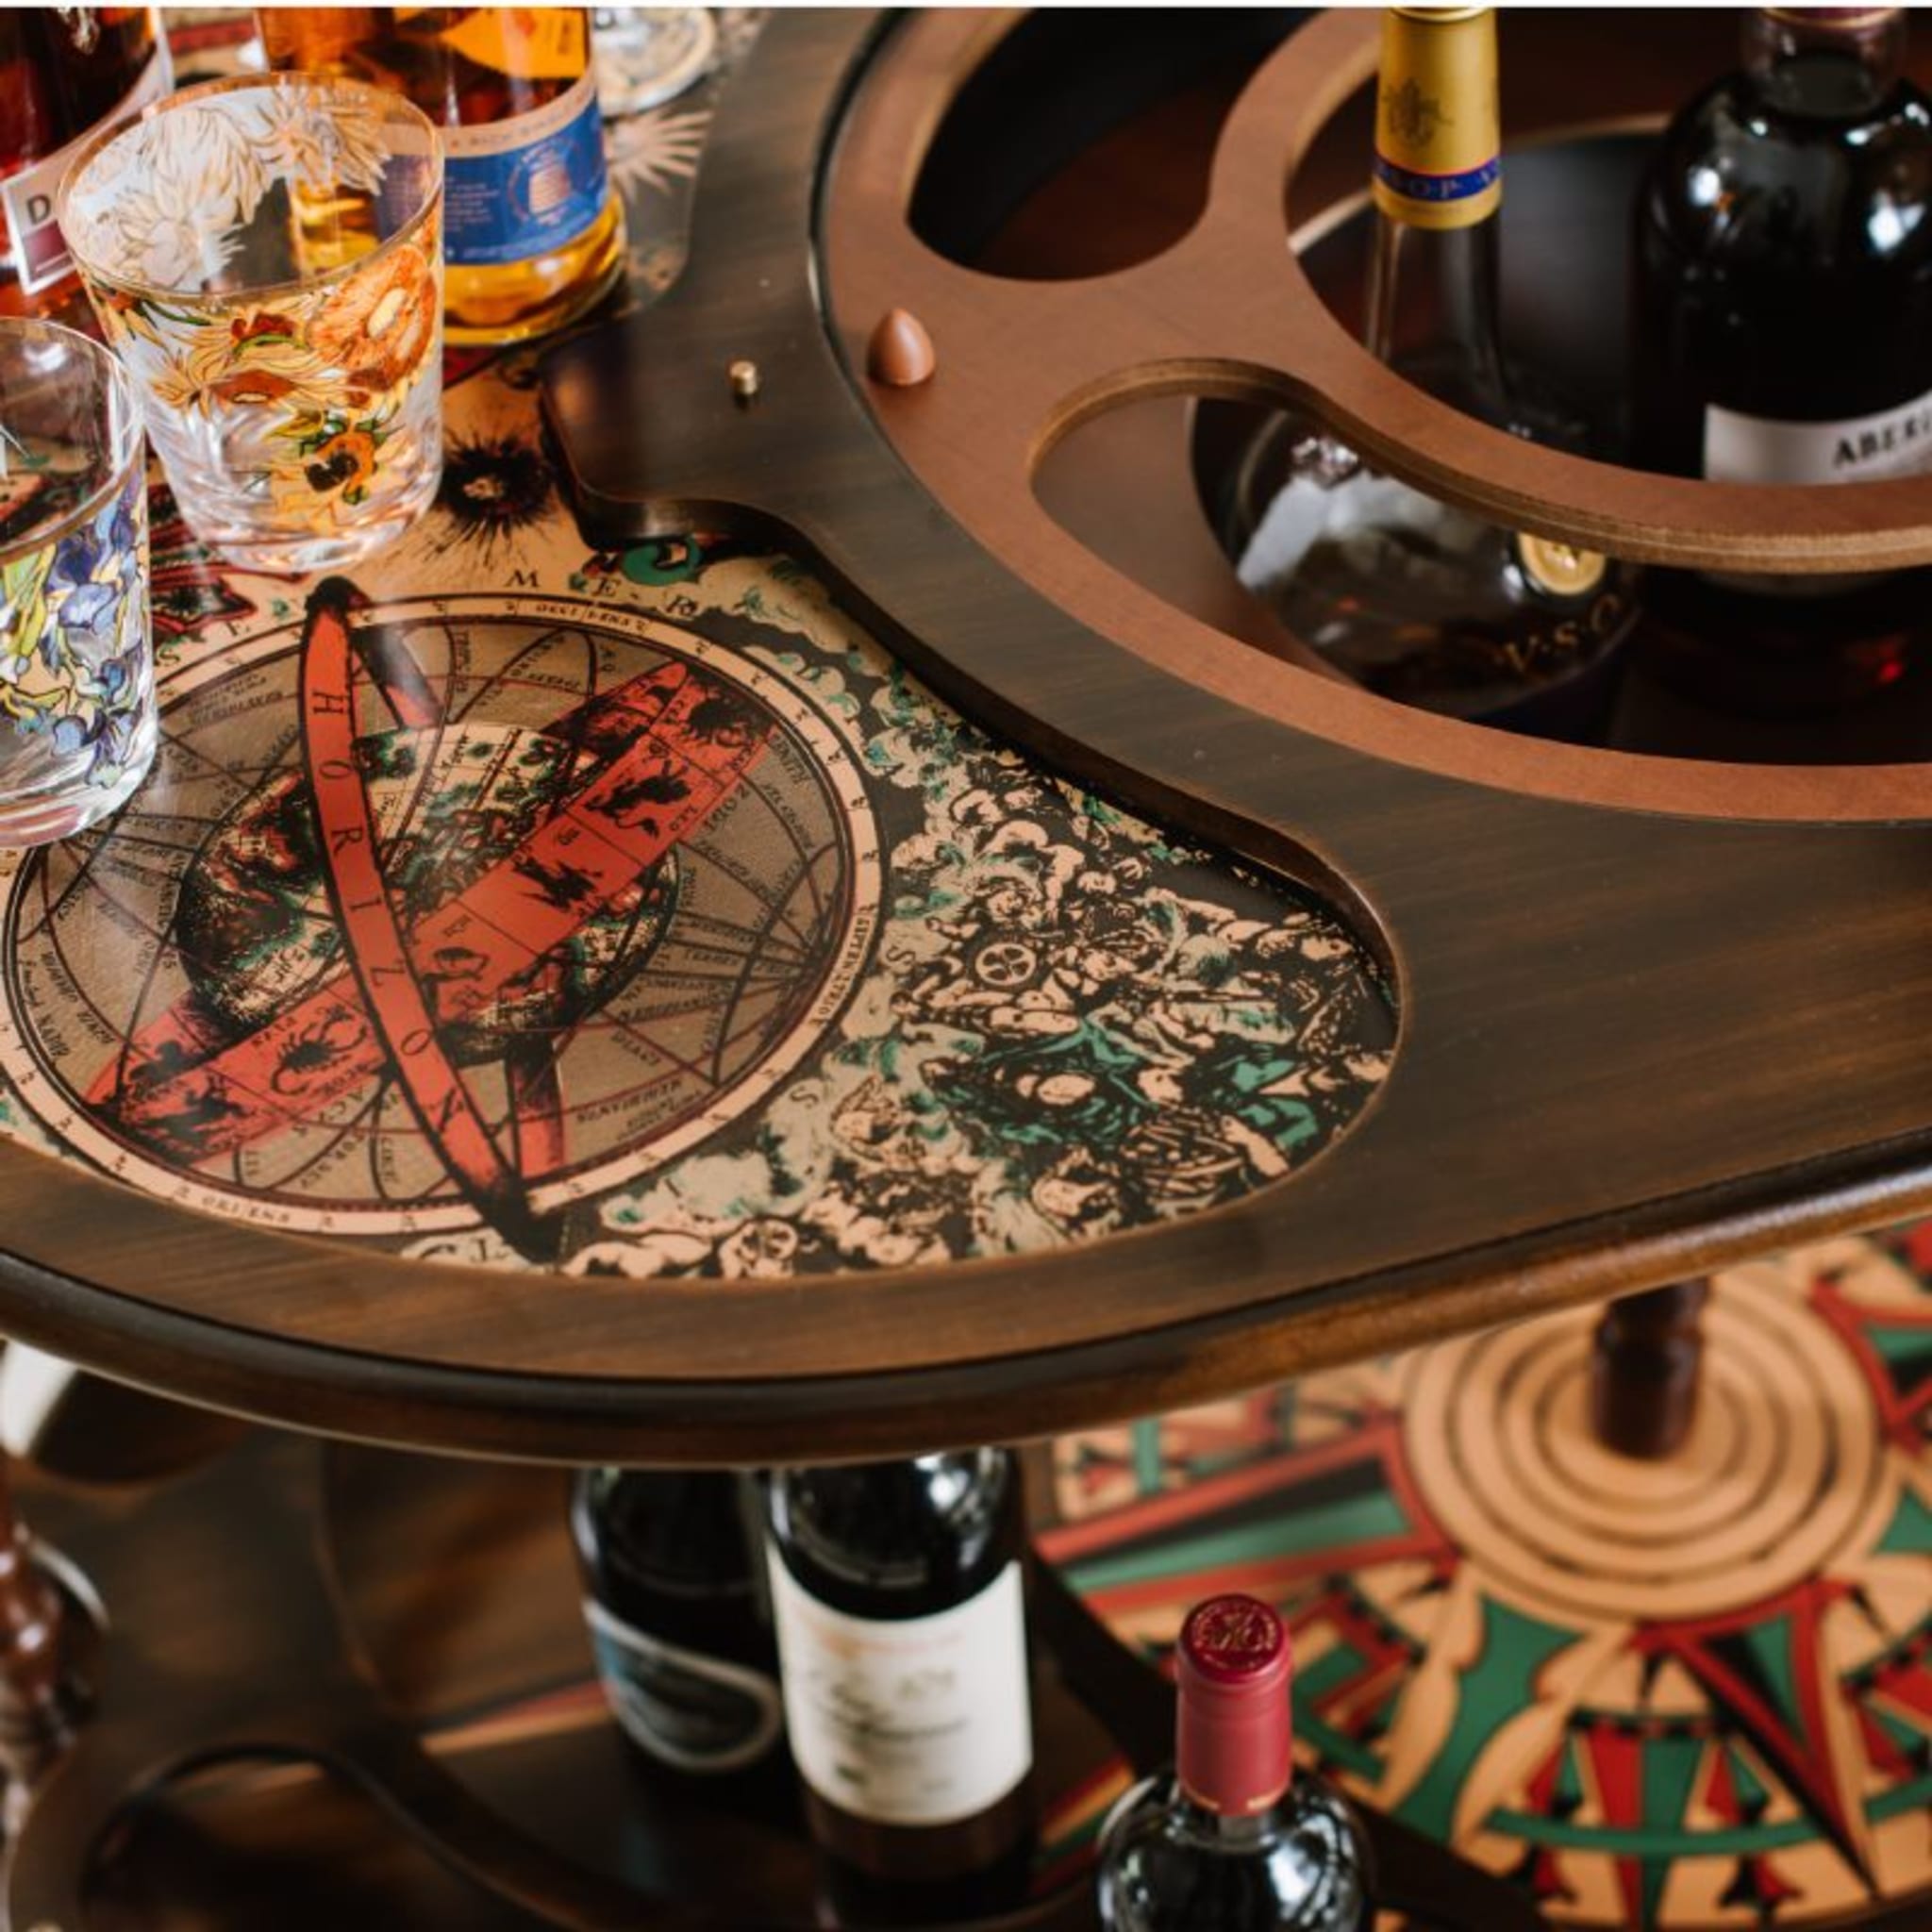 Make your gatherings unforgettable with this charming and functional Sophistication Globe Bar.